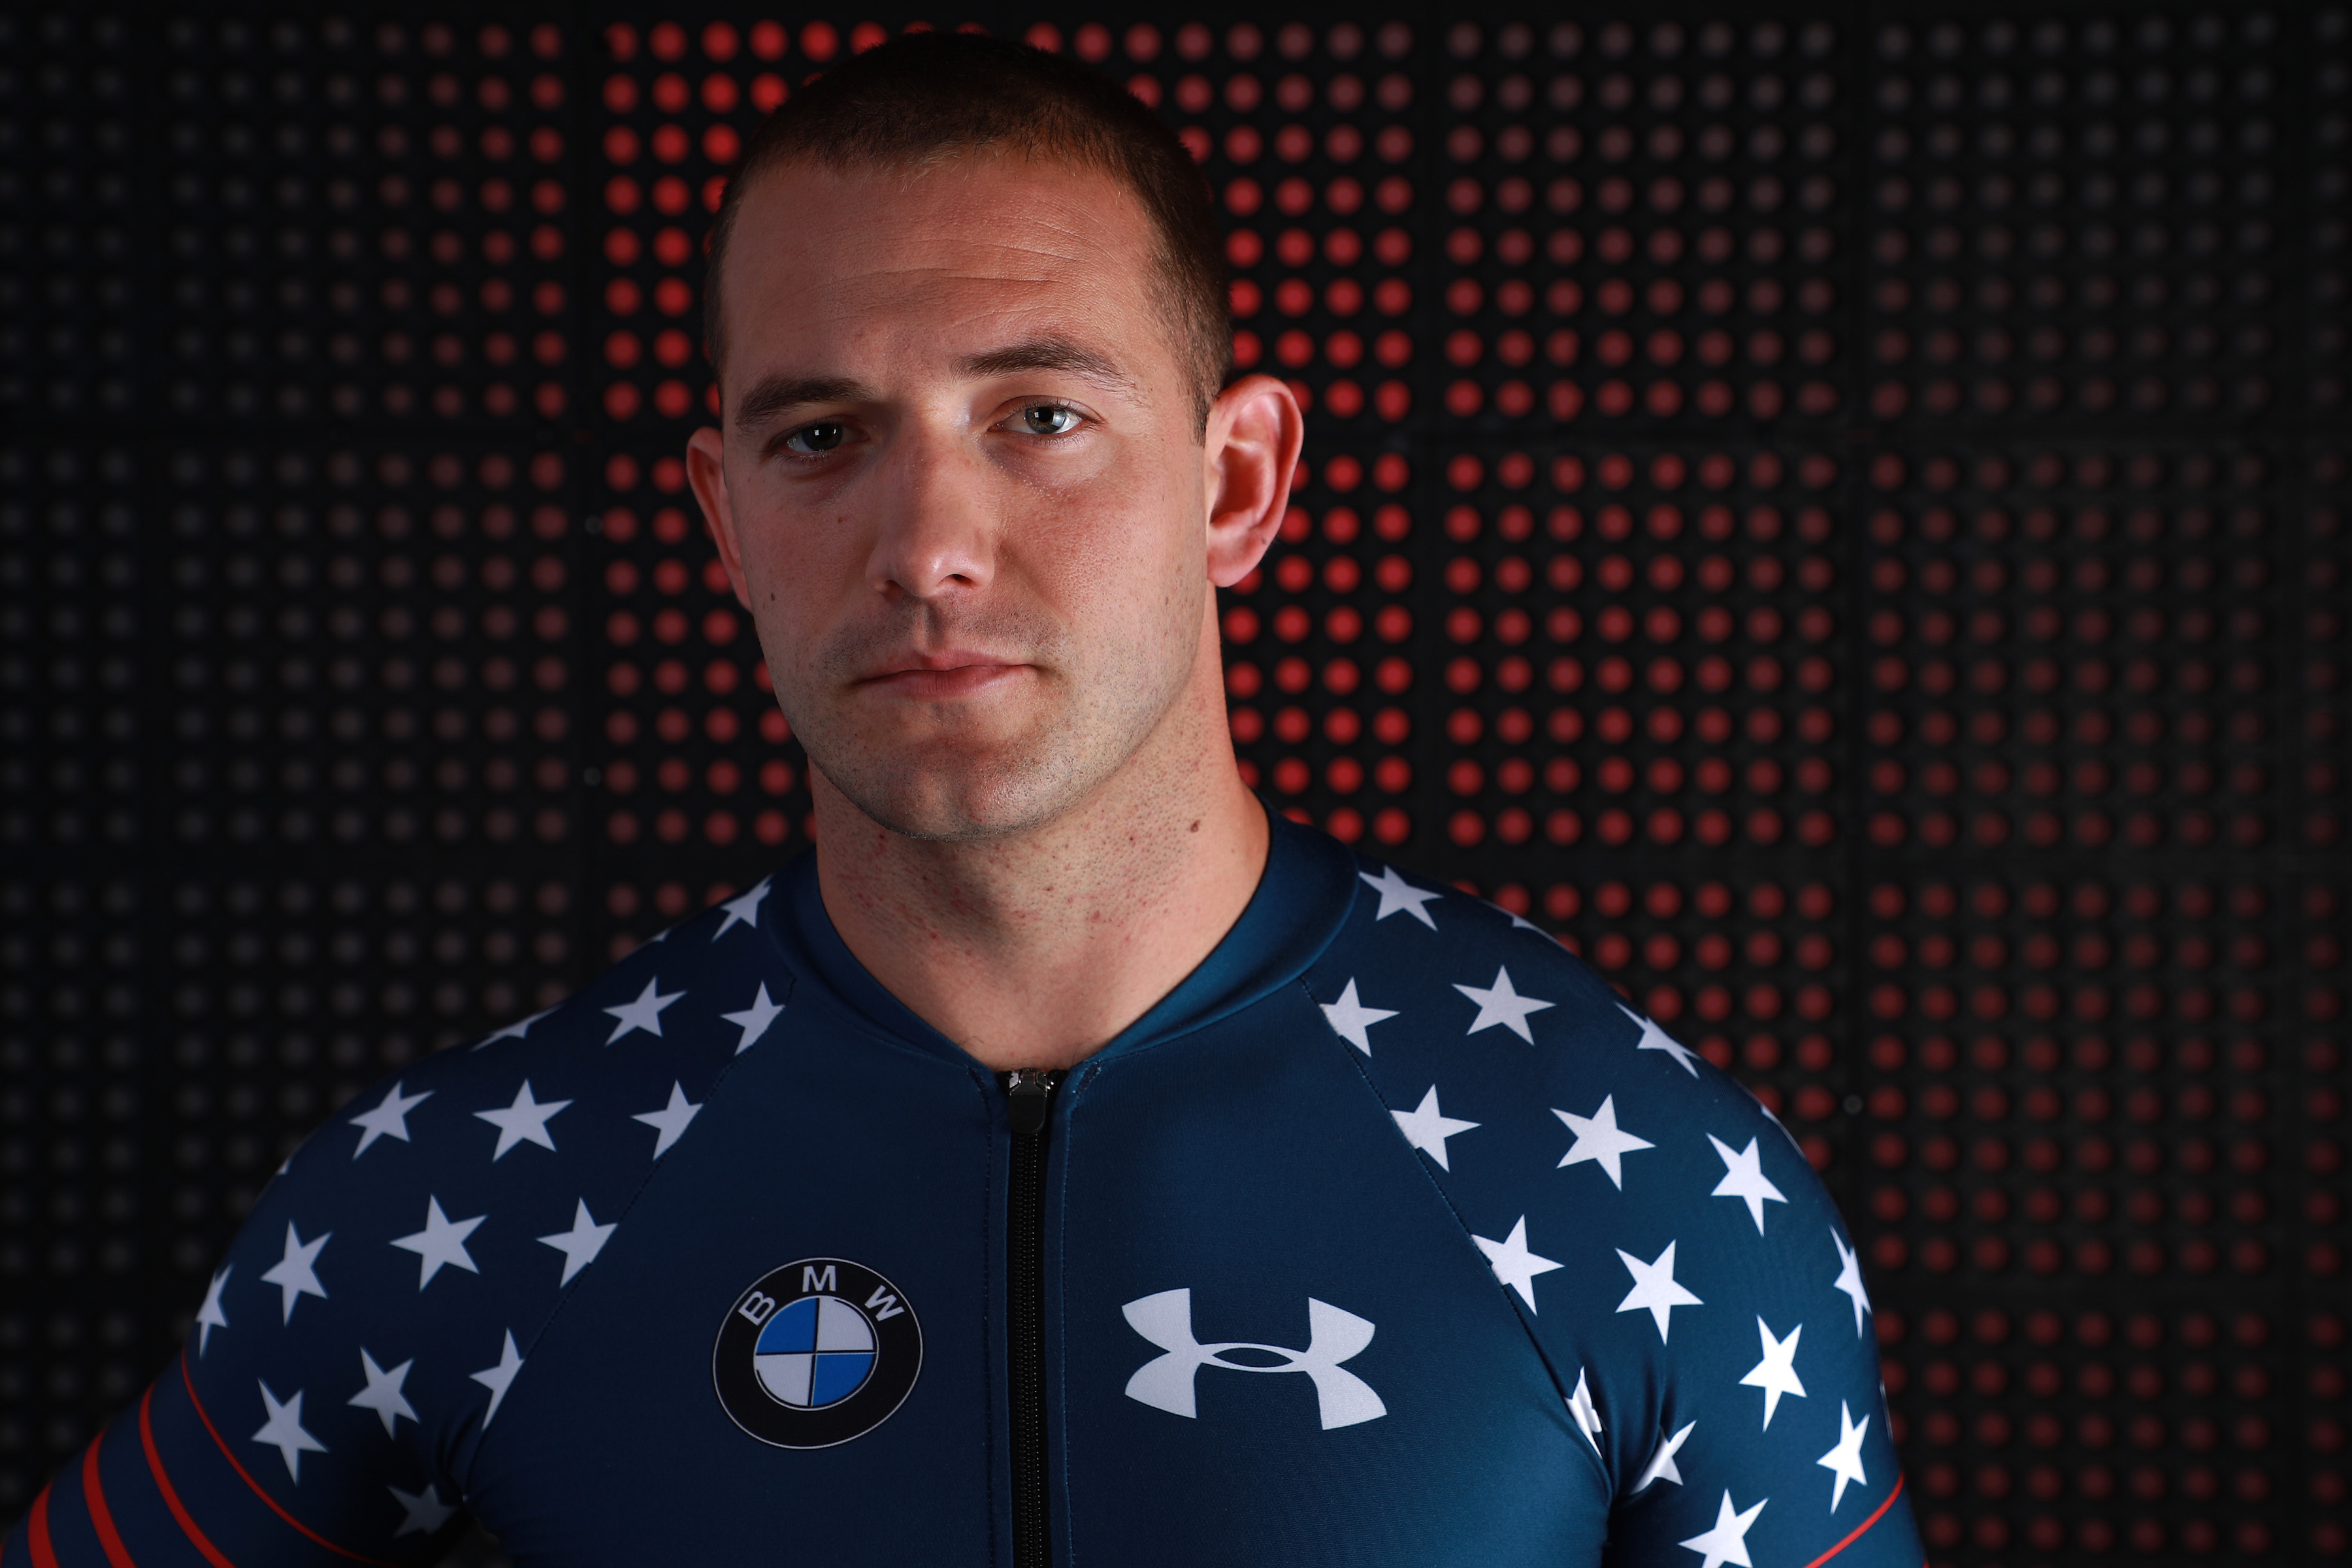 Bobsledder Justin Olsen poses for a portrait during the Team USA Media Summit ahead of the PyeongChang 2018 Olympic Winter Games on September 26, 2017 in Park City, Utah.  (Photo by Ron Jenkins/Getty Images)